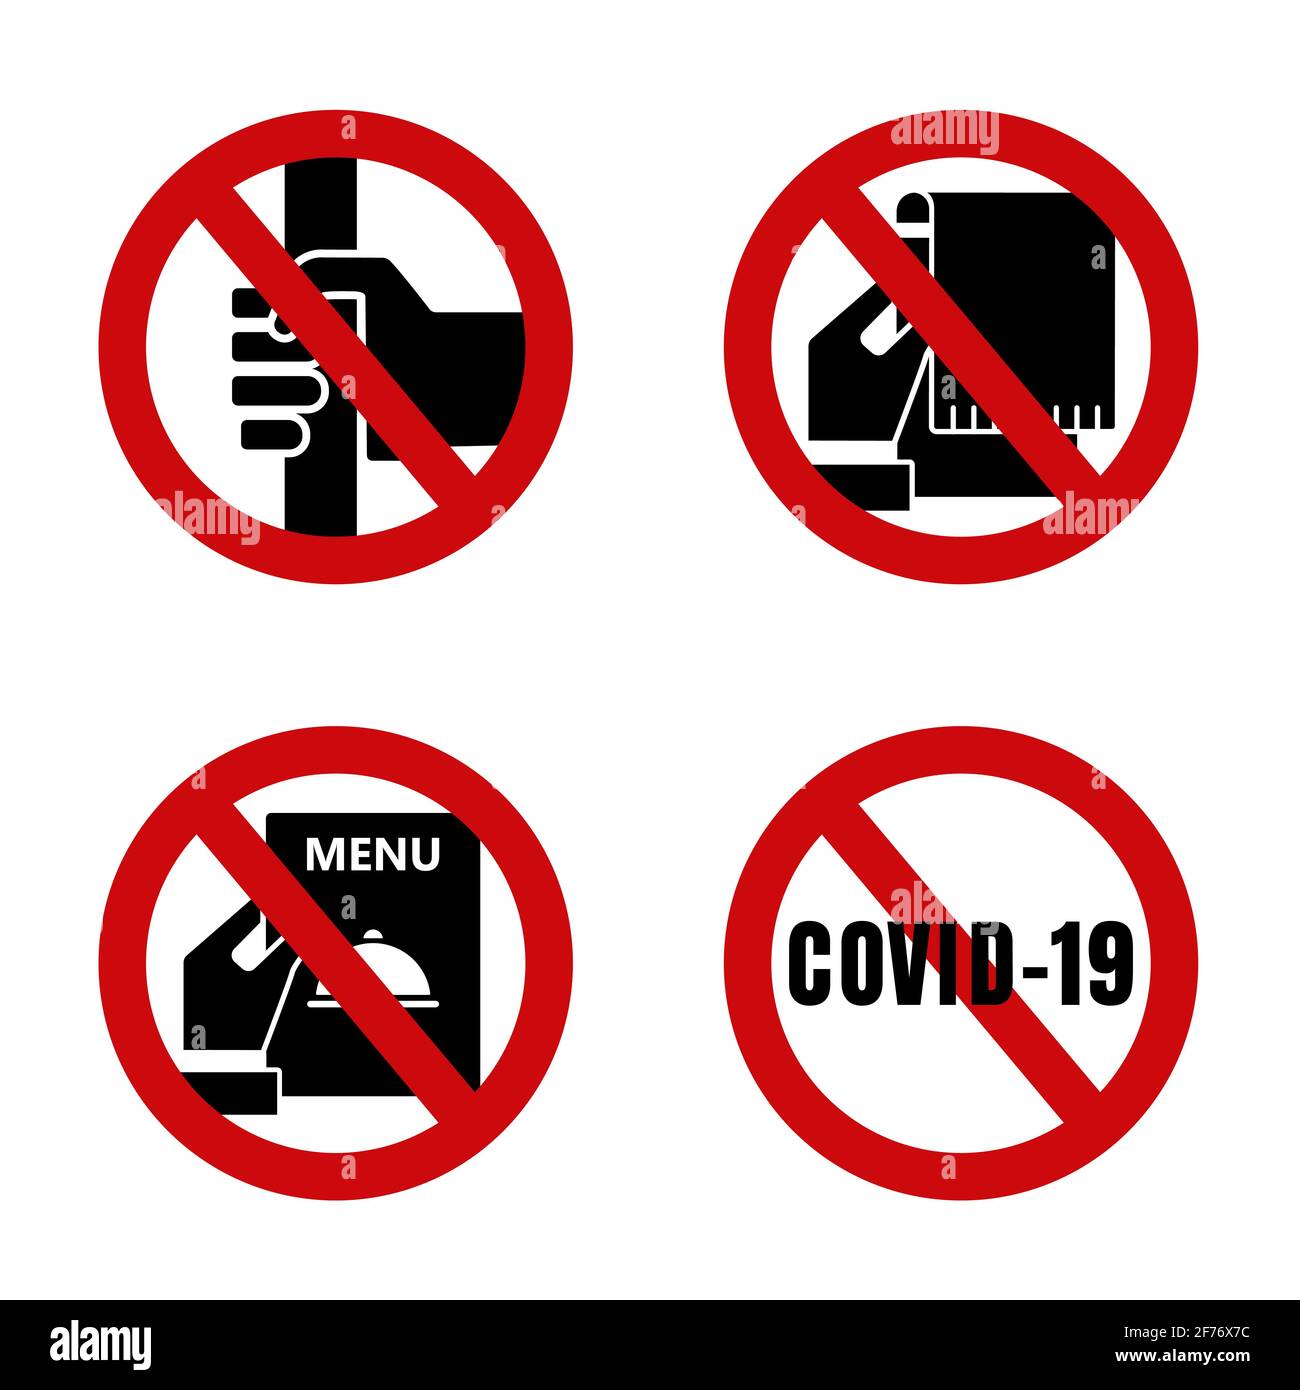 Coronavirus, 2019-nCoV. Stop Prohibition Red Icons. Forbidden sign with no Coronavirus. Don't touch Handrail, Menu, Towel. Stock Vector